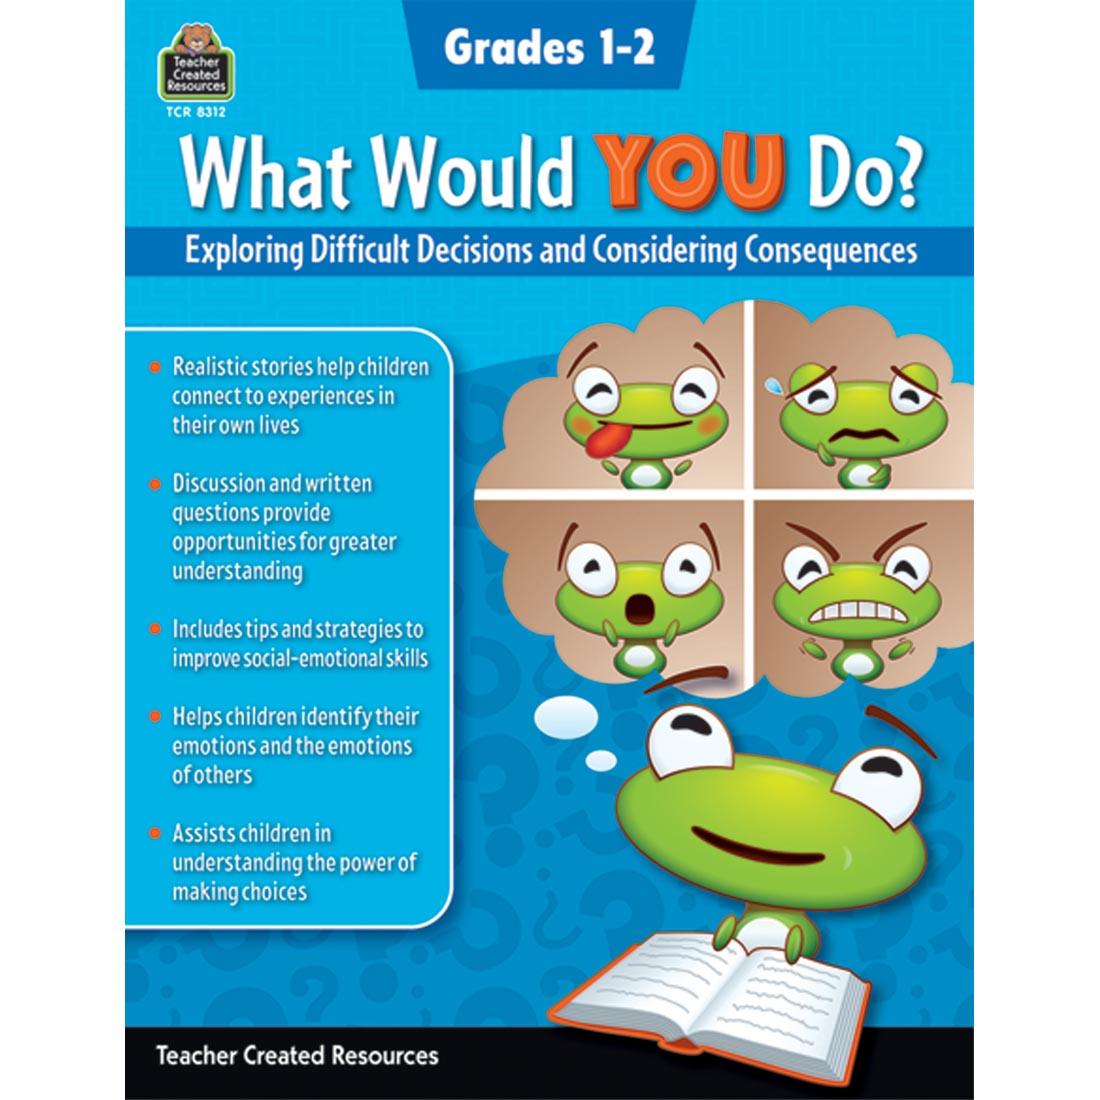 What Would YOU Do? Exploring Difficult Decisions And Considering Consequences Grades 1-2